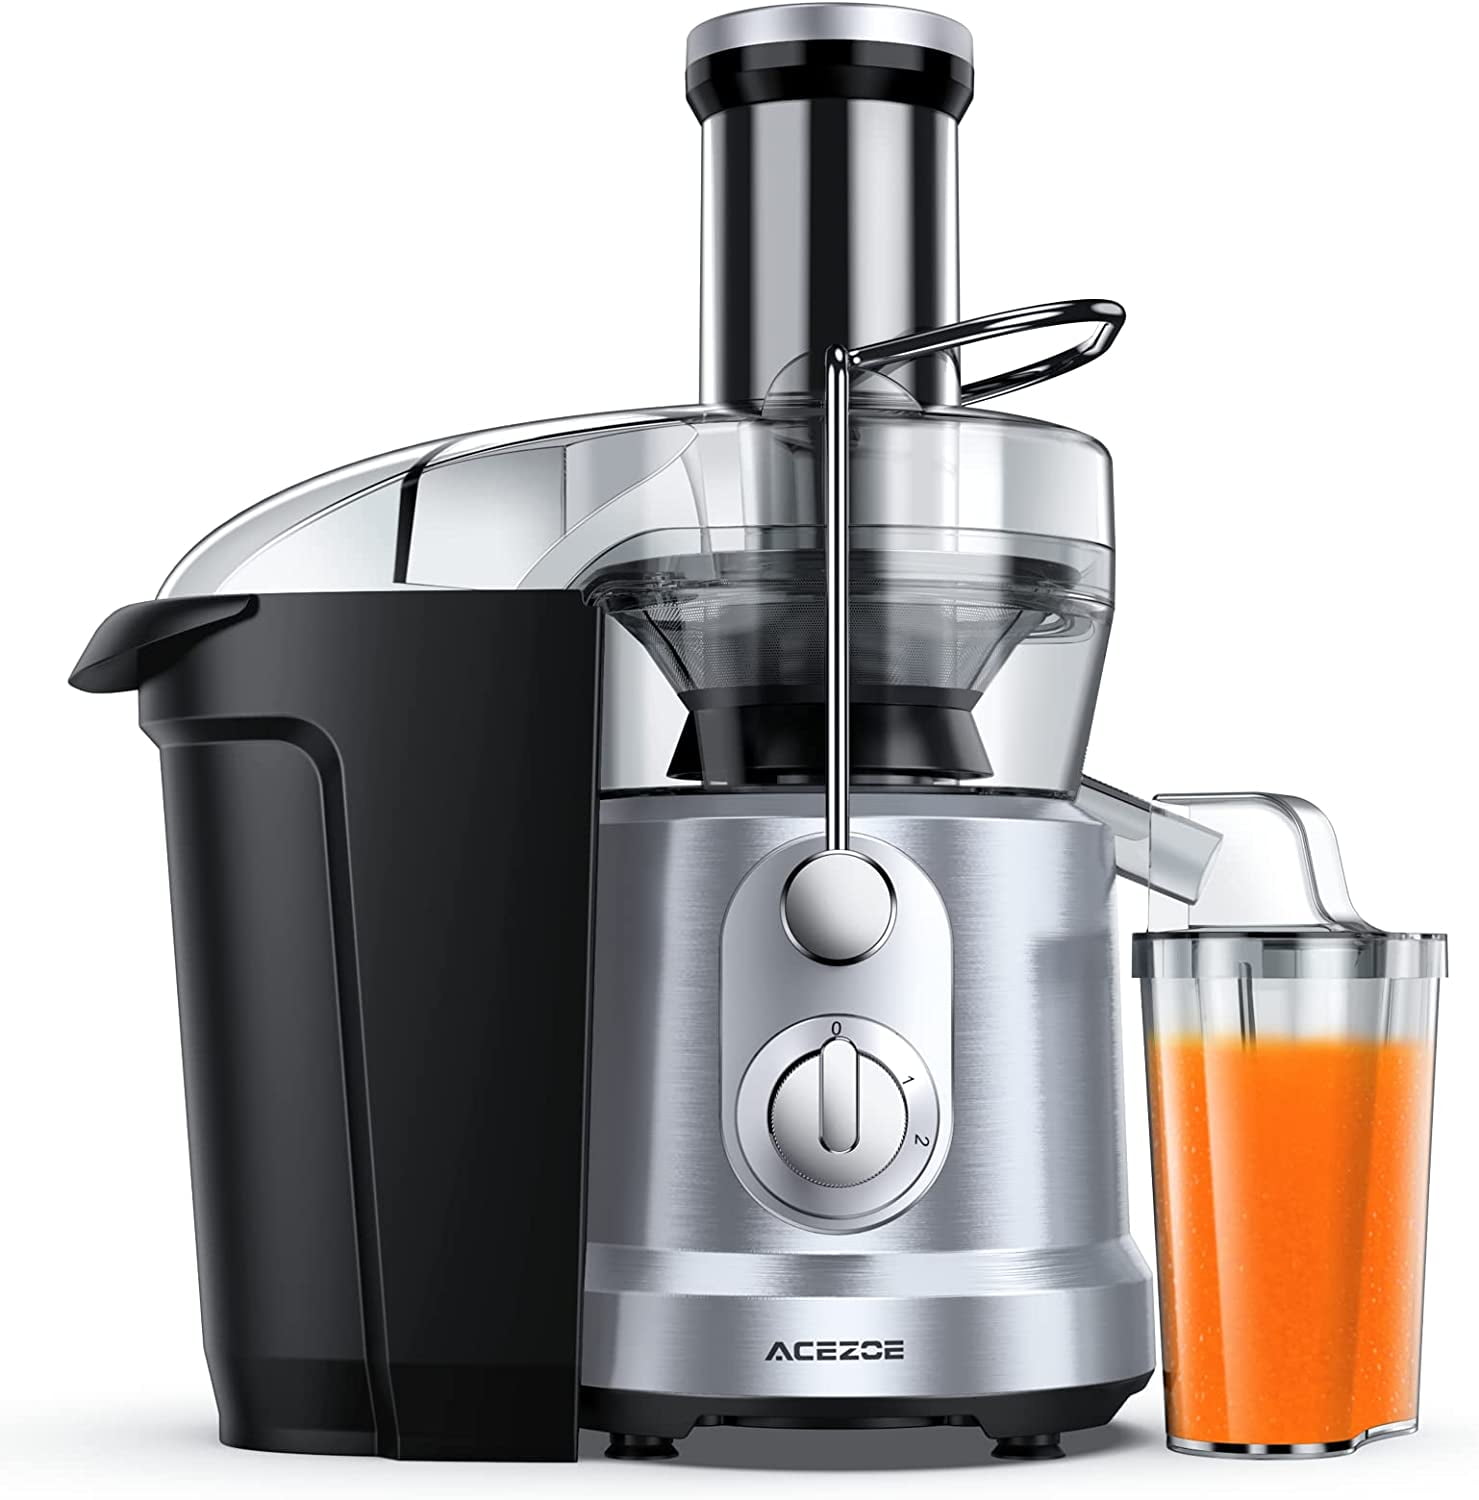 Acezoe Juicer Machines Vegetable and Fruit Power Juicers Extractor with 3&#34; Feed Chute Centrifugal Juicer with Juice Yield Easy to Clean&amp;BPA-Free Dishwasher S - Walmart.com